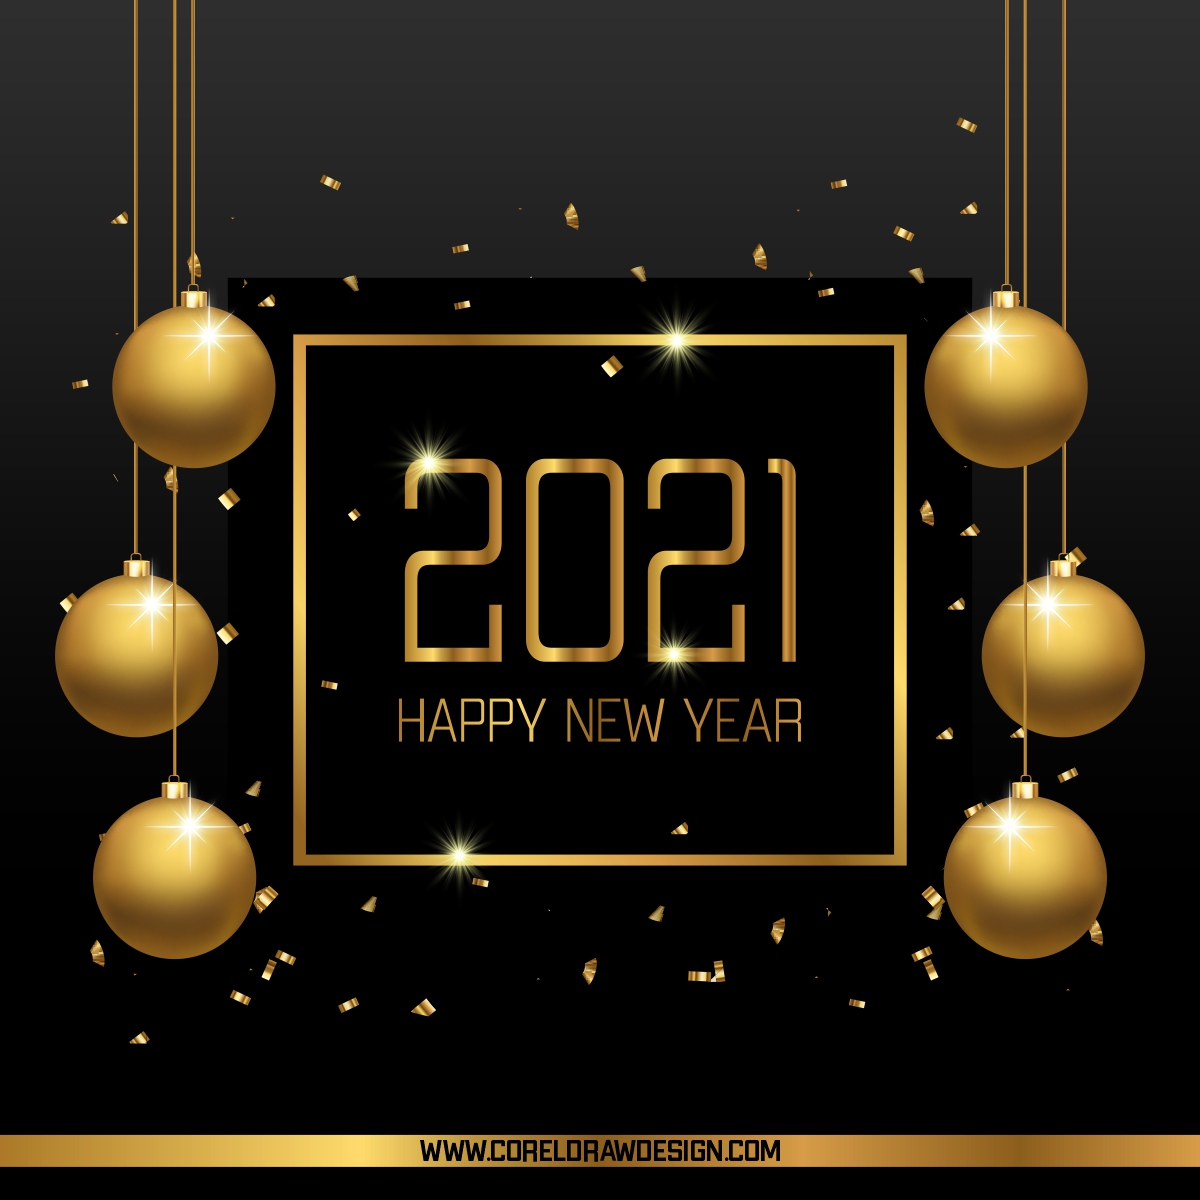 Happy New Year Greeting Card & Golden Christmas Balls Free Vector